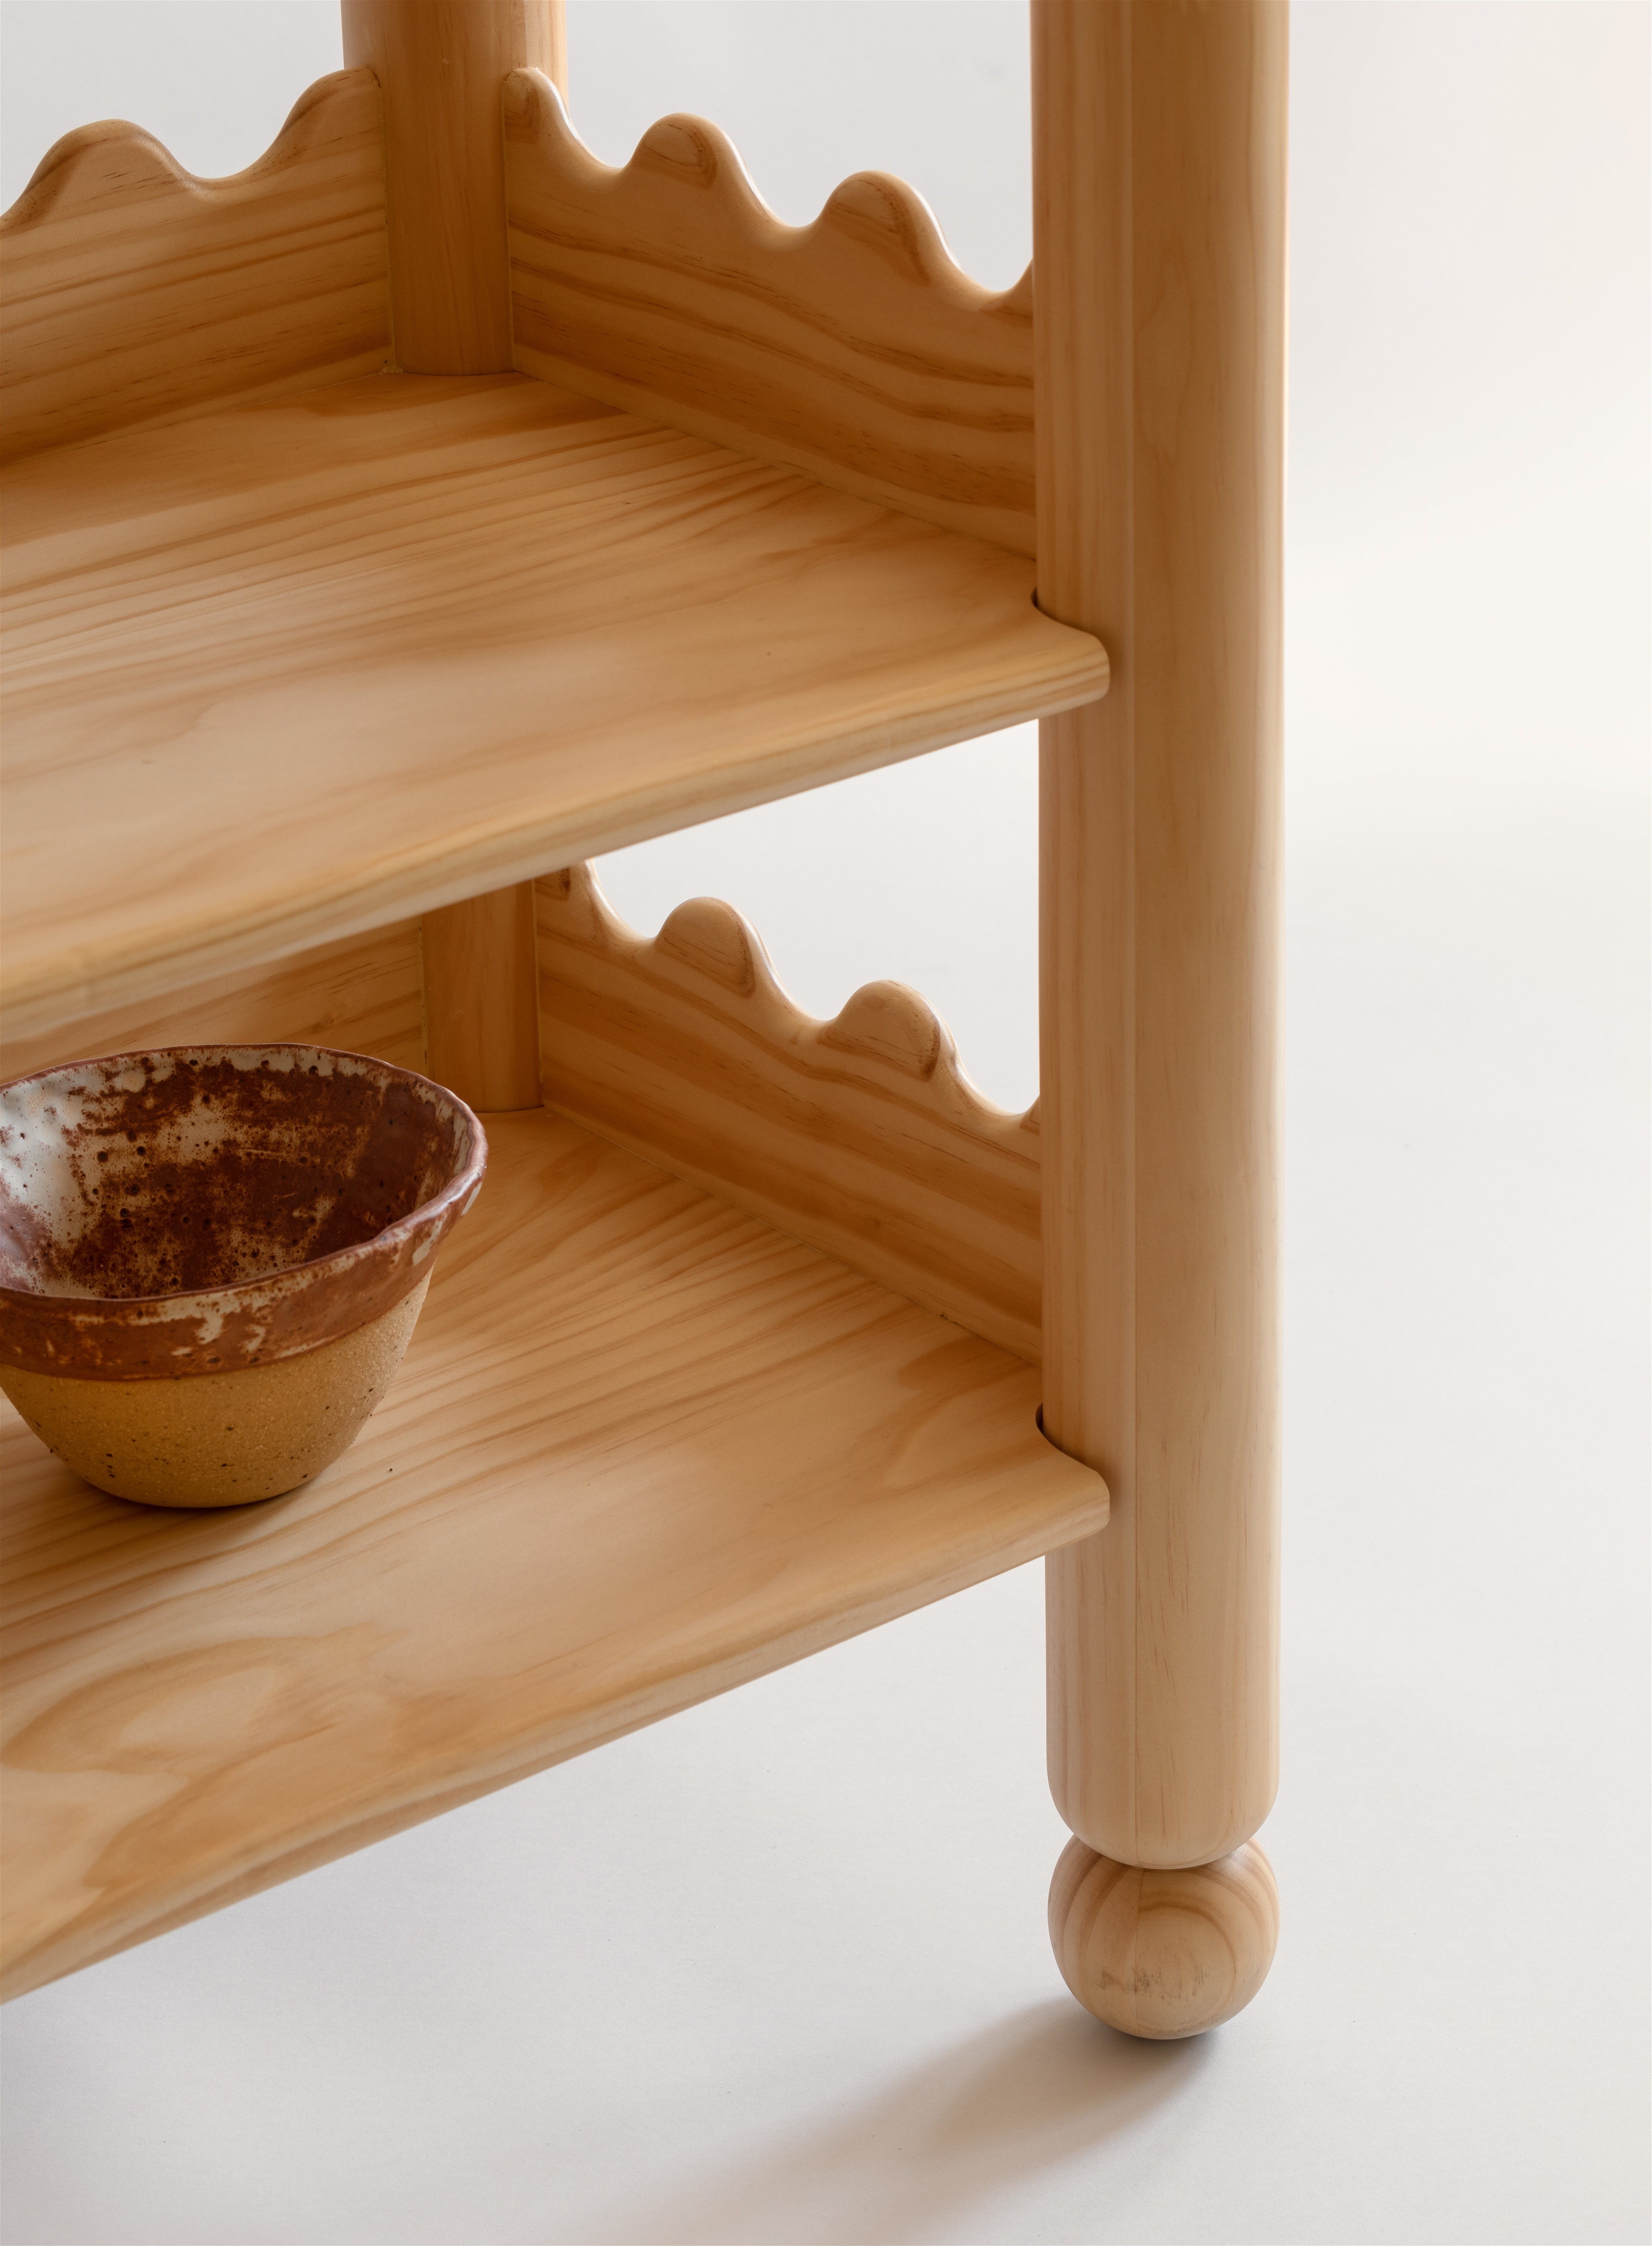 a wooden shelf with a bowl on top of it